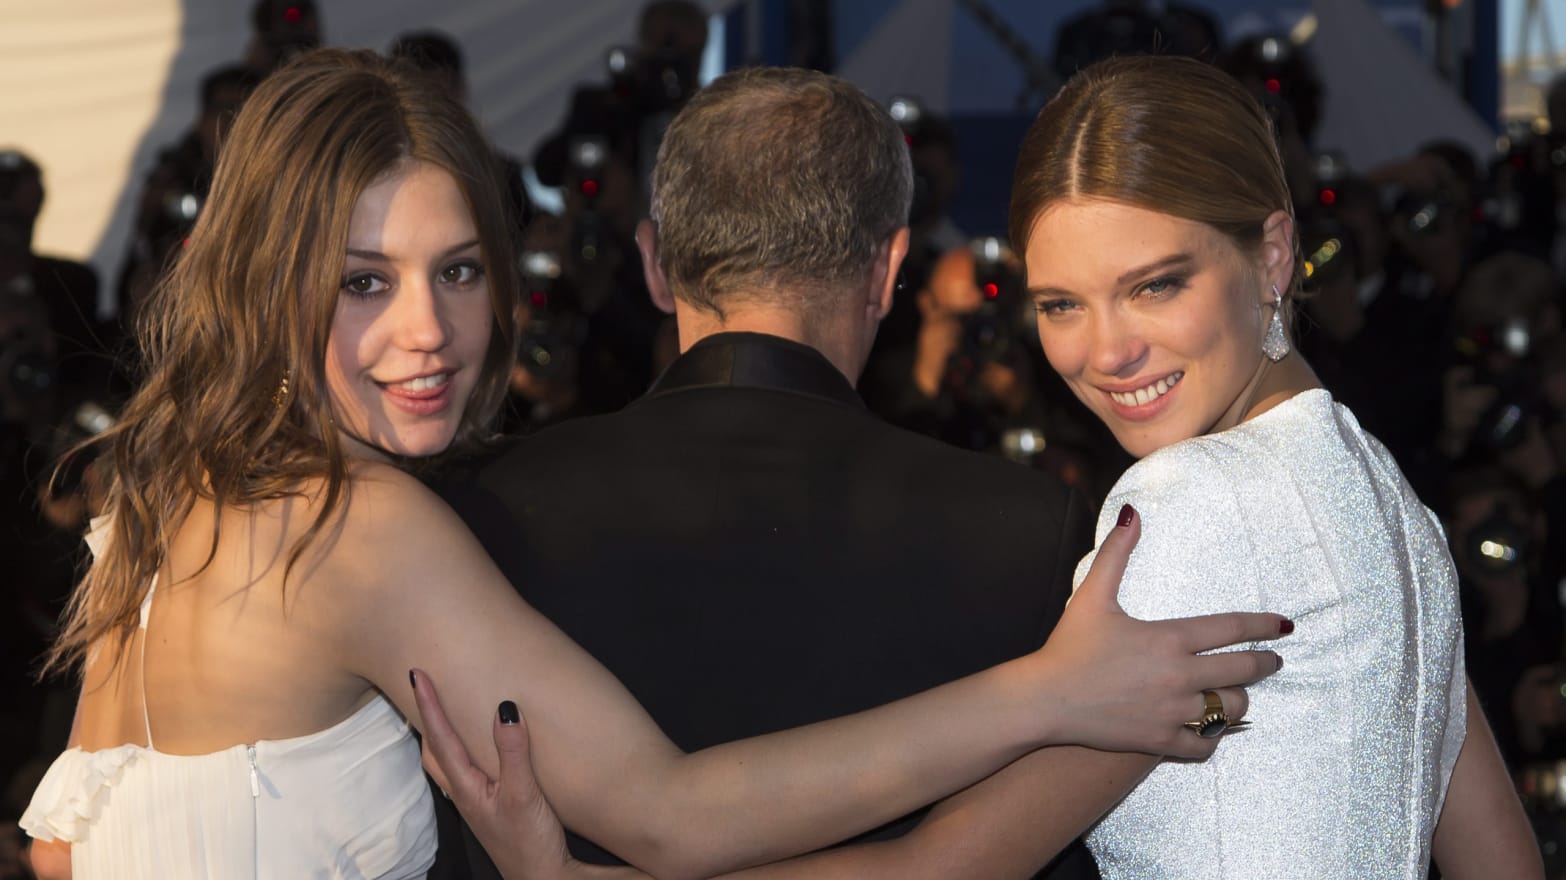 Image of lead actresses from 'Blue Is the Warmest Color'